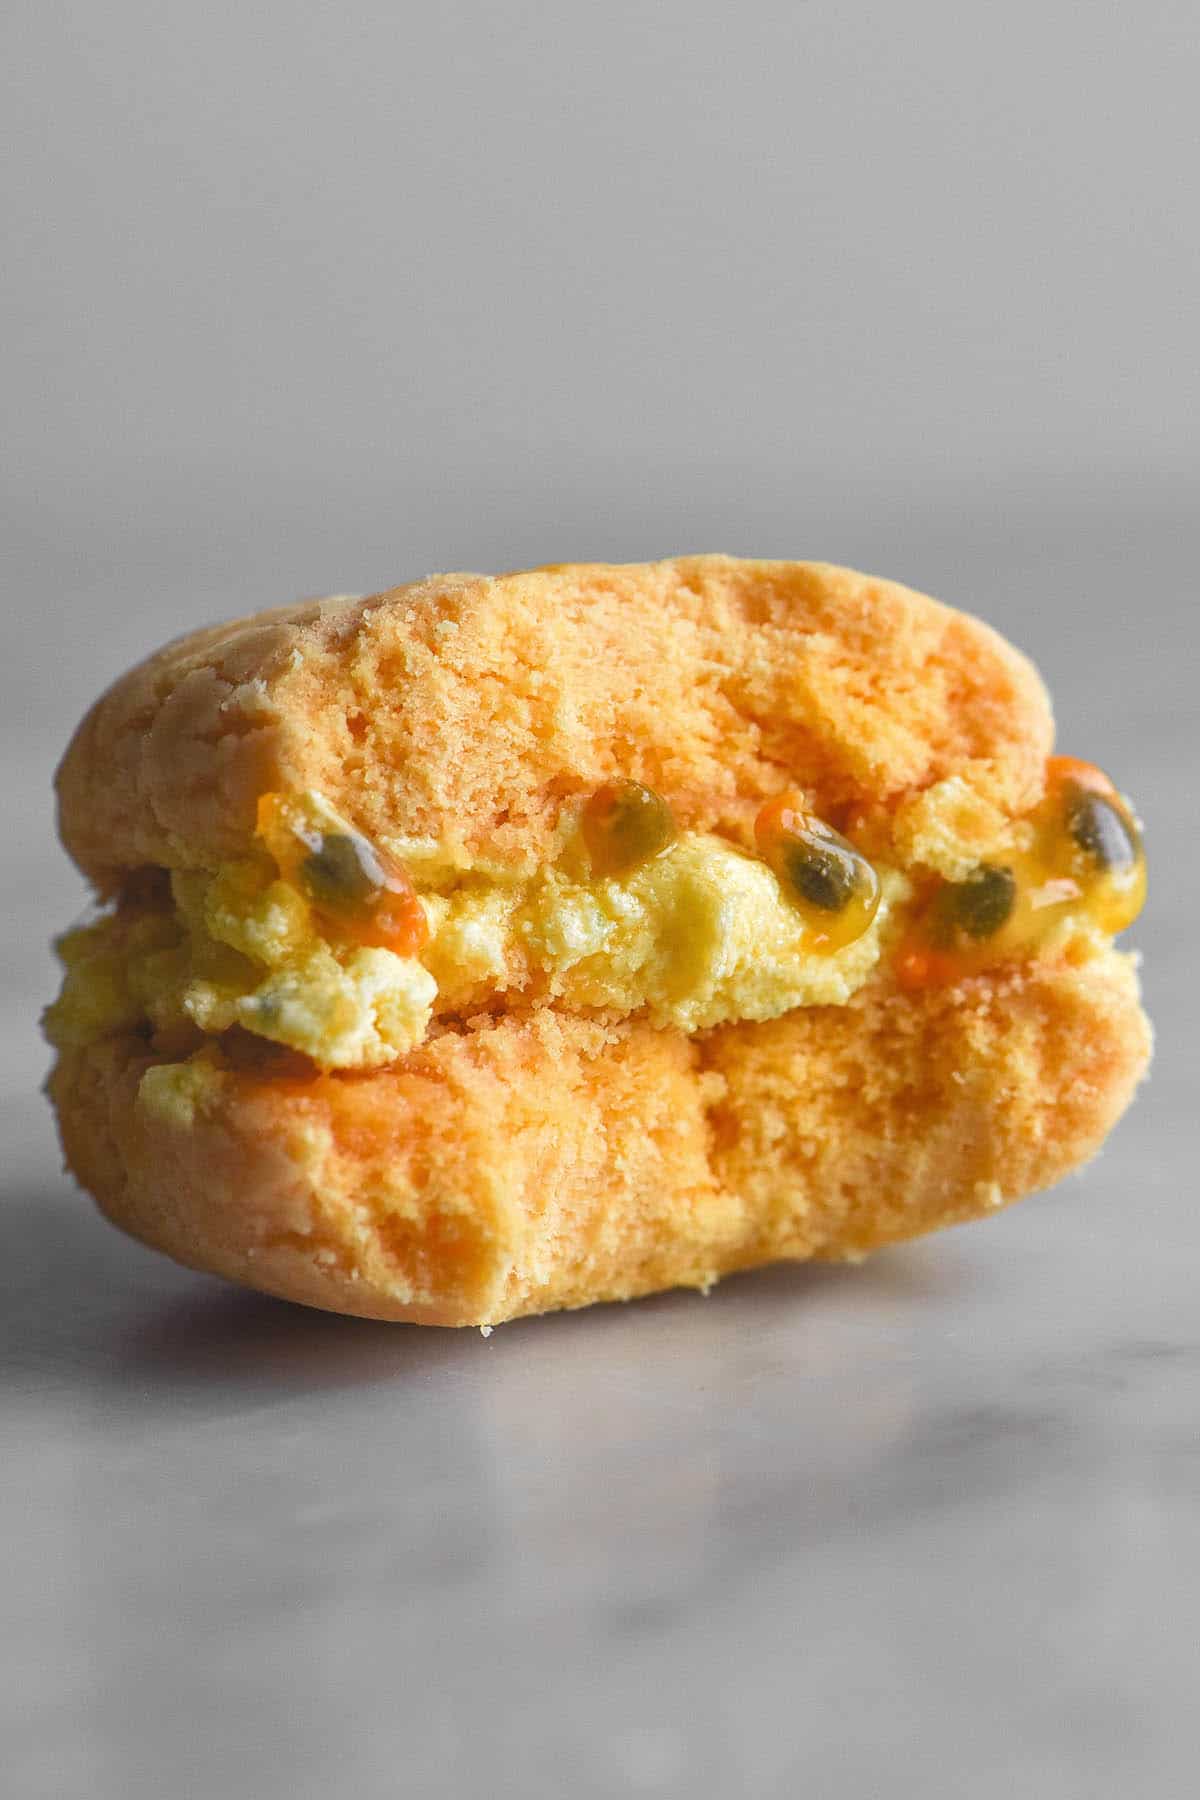 A close up image of a gluten free yoyo biscuit with a lime and passionfruit filling. The yoyo sits on a white marble table against a white backdrop